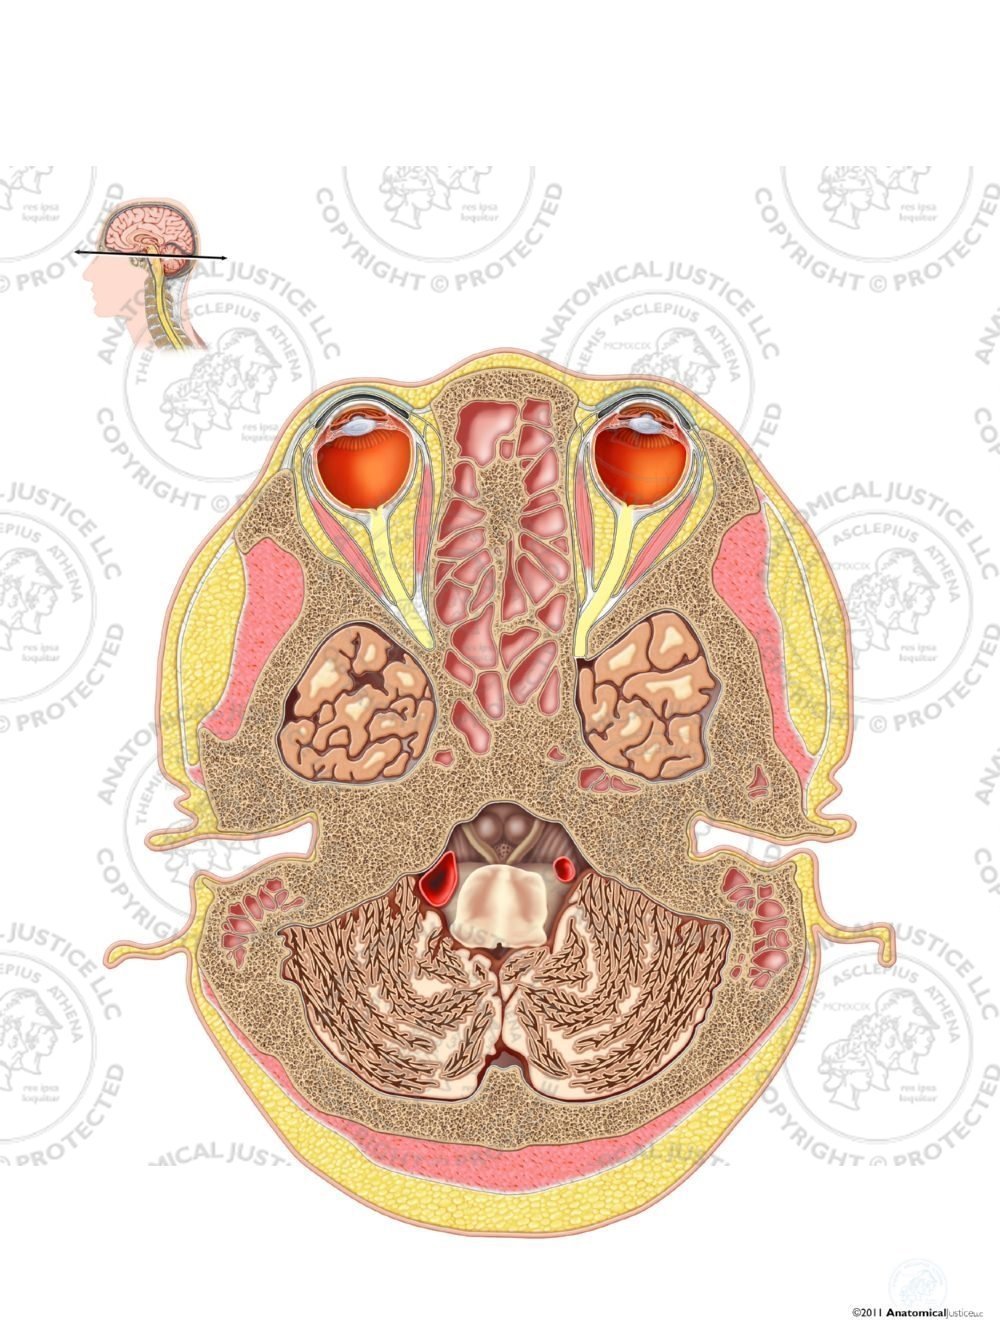 Cross Section of the Brain – Ocular Level – No Text